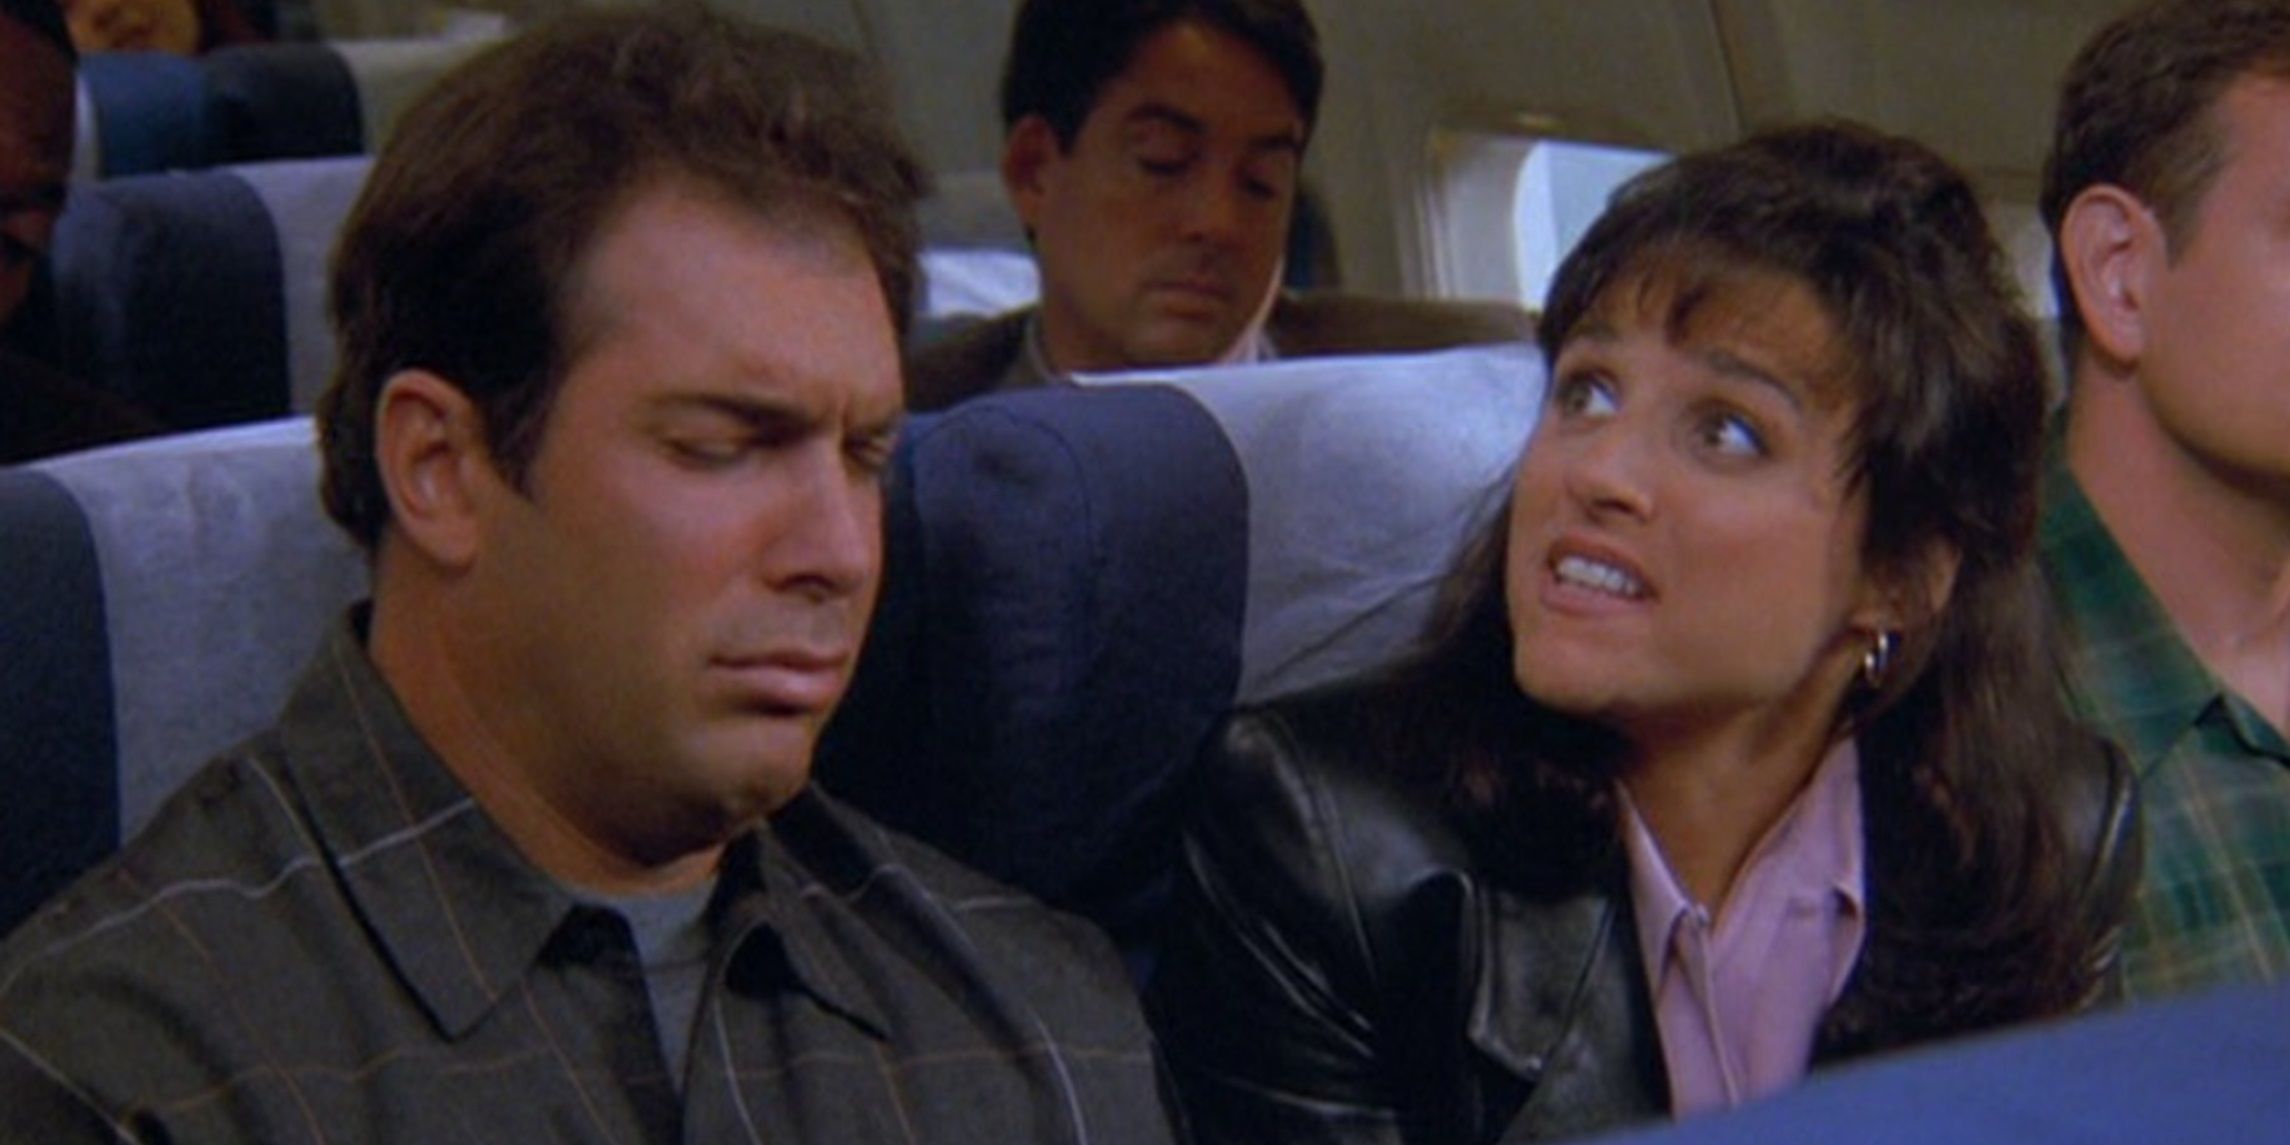 Puddy and Elaine sitting in an airplane